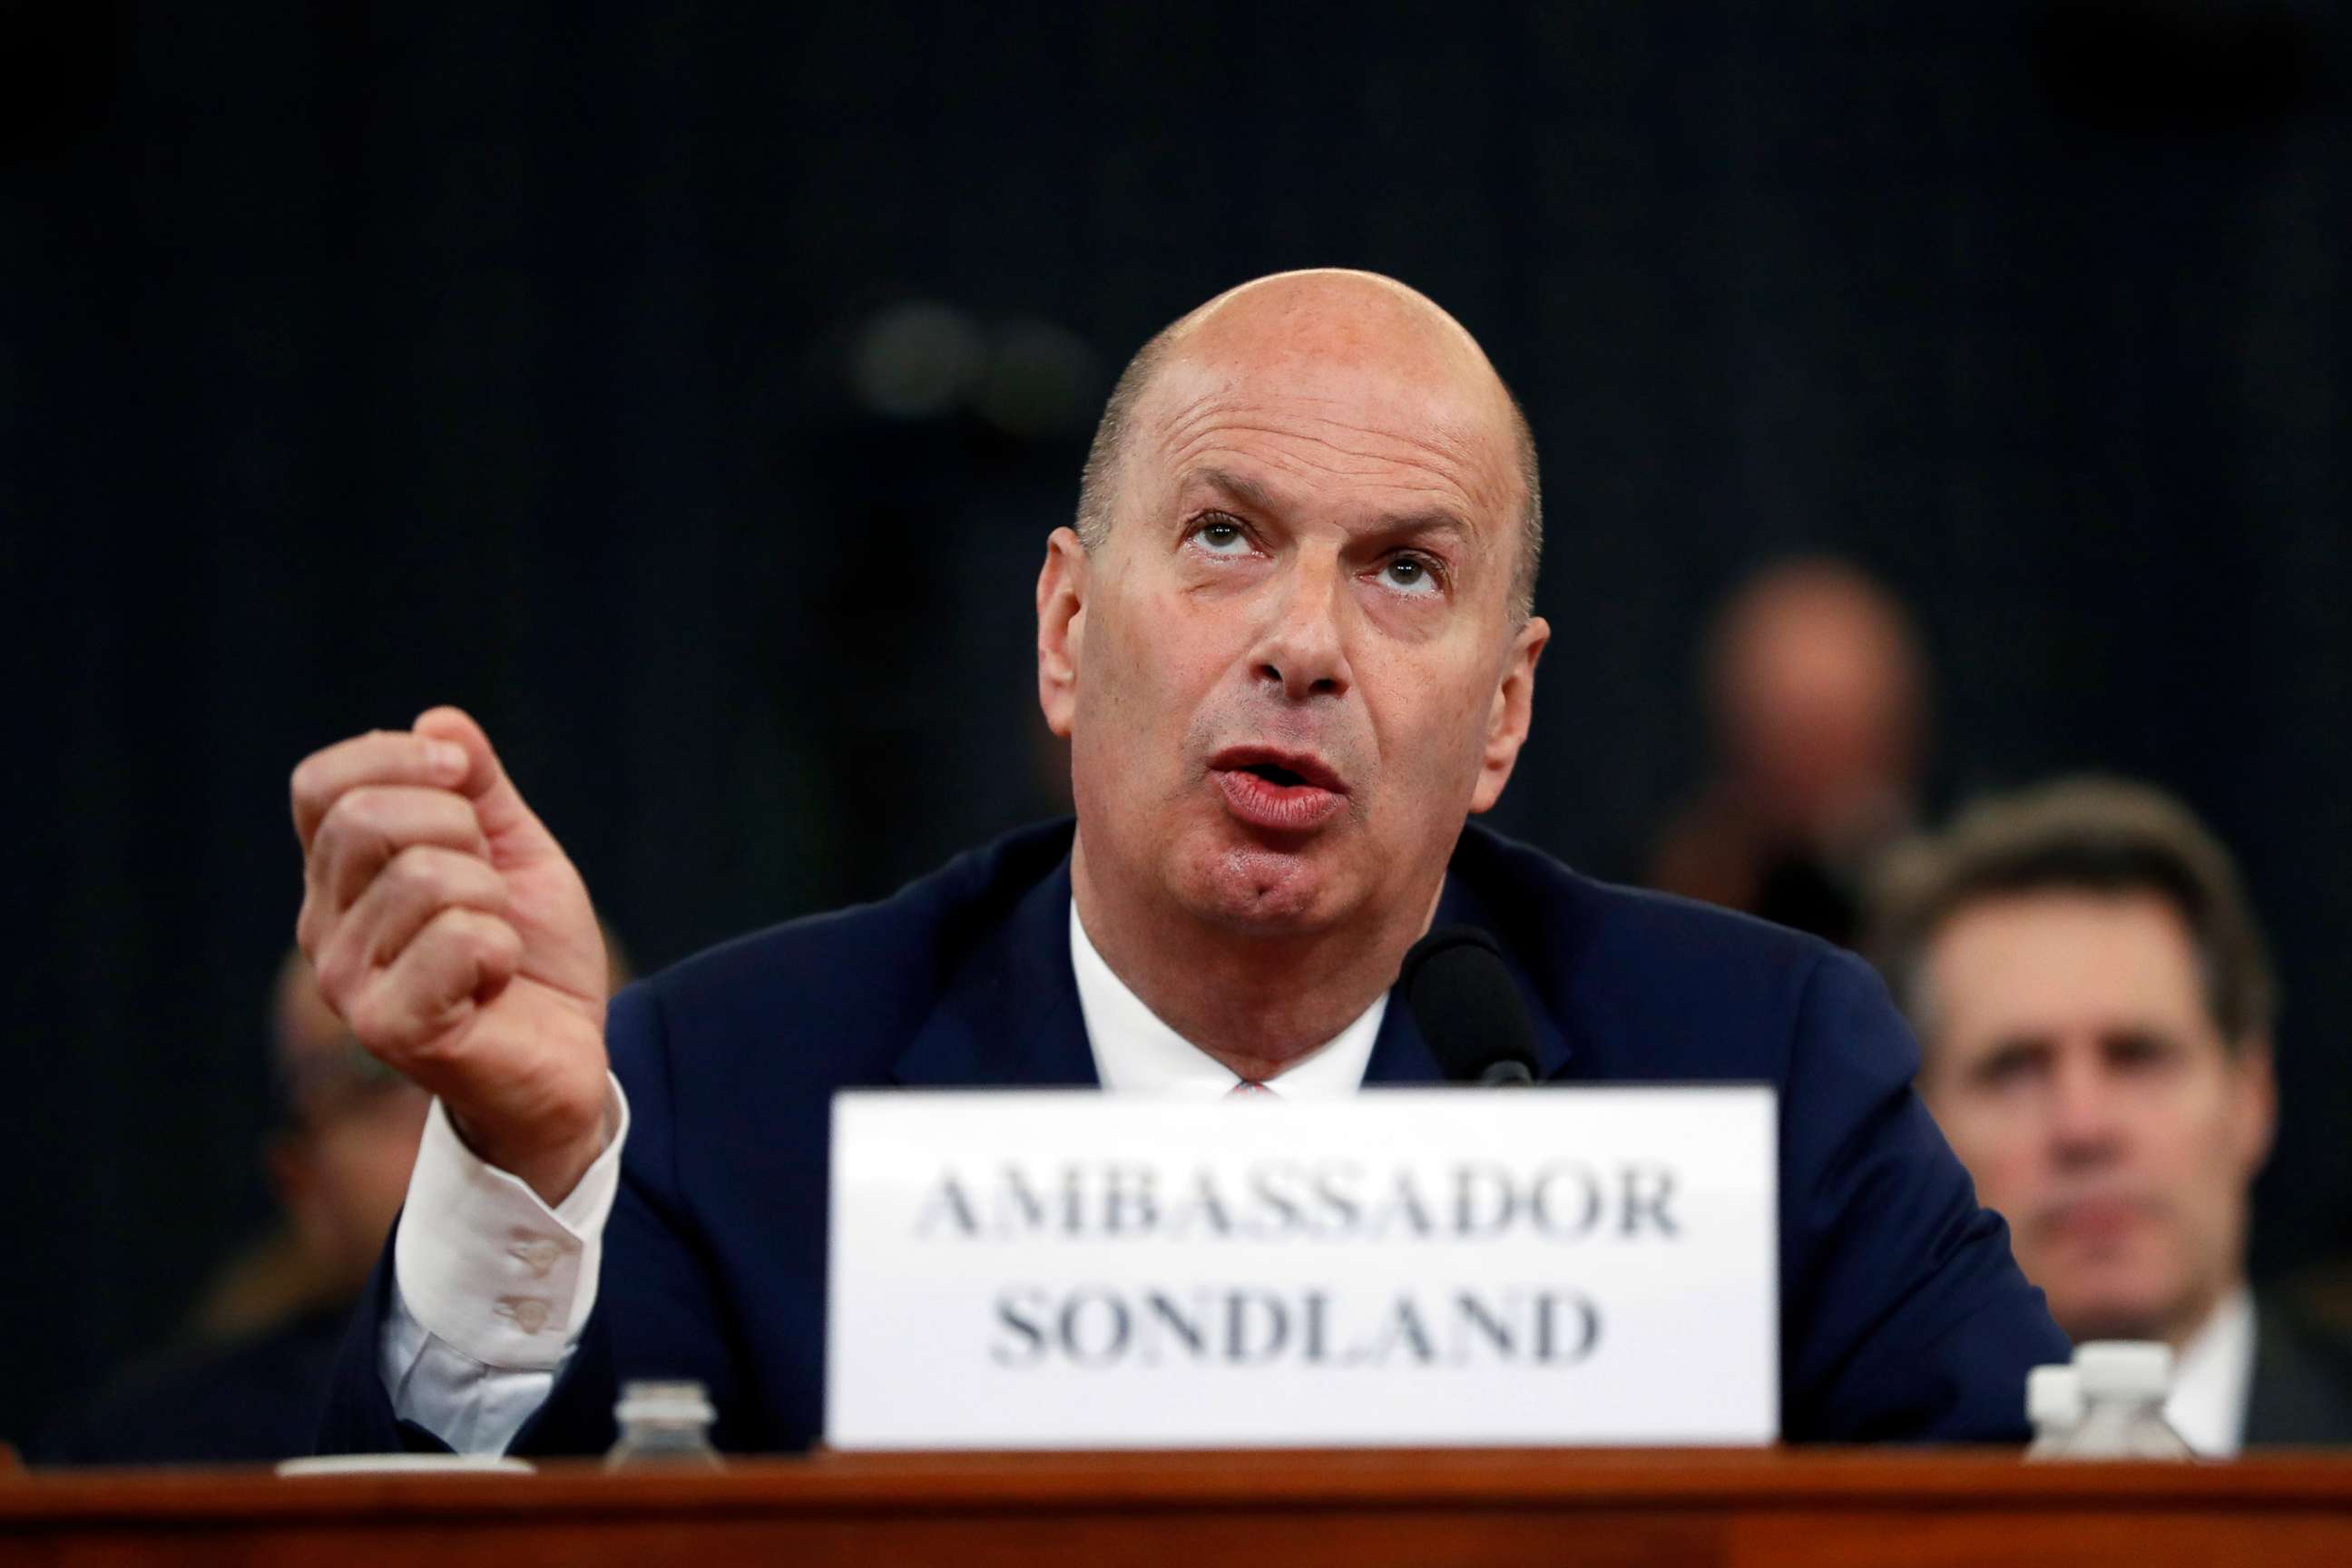 PHOTO: U.S. Ambassador to the European Union Gordon Sondland testifies before the House Intelligence Committee on Capitol Hill in Washington, D.C., Nov. 20, 2019, during a public impeachment hearing.